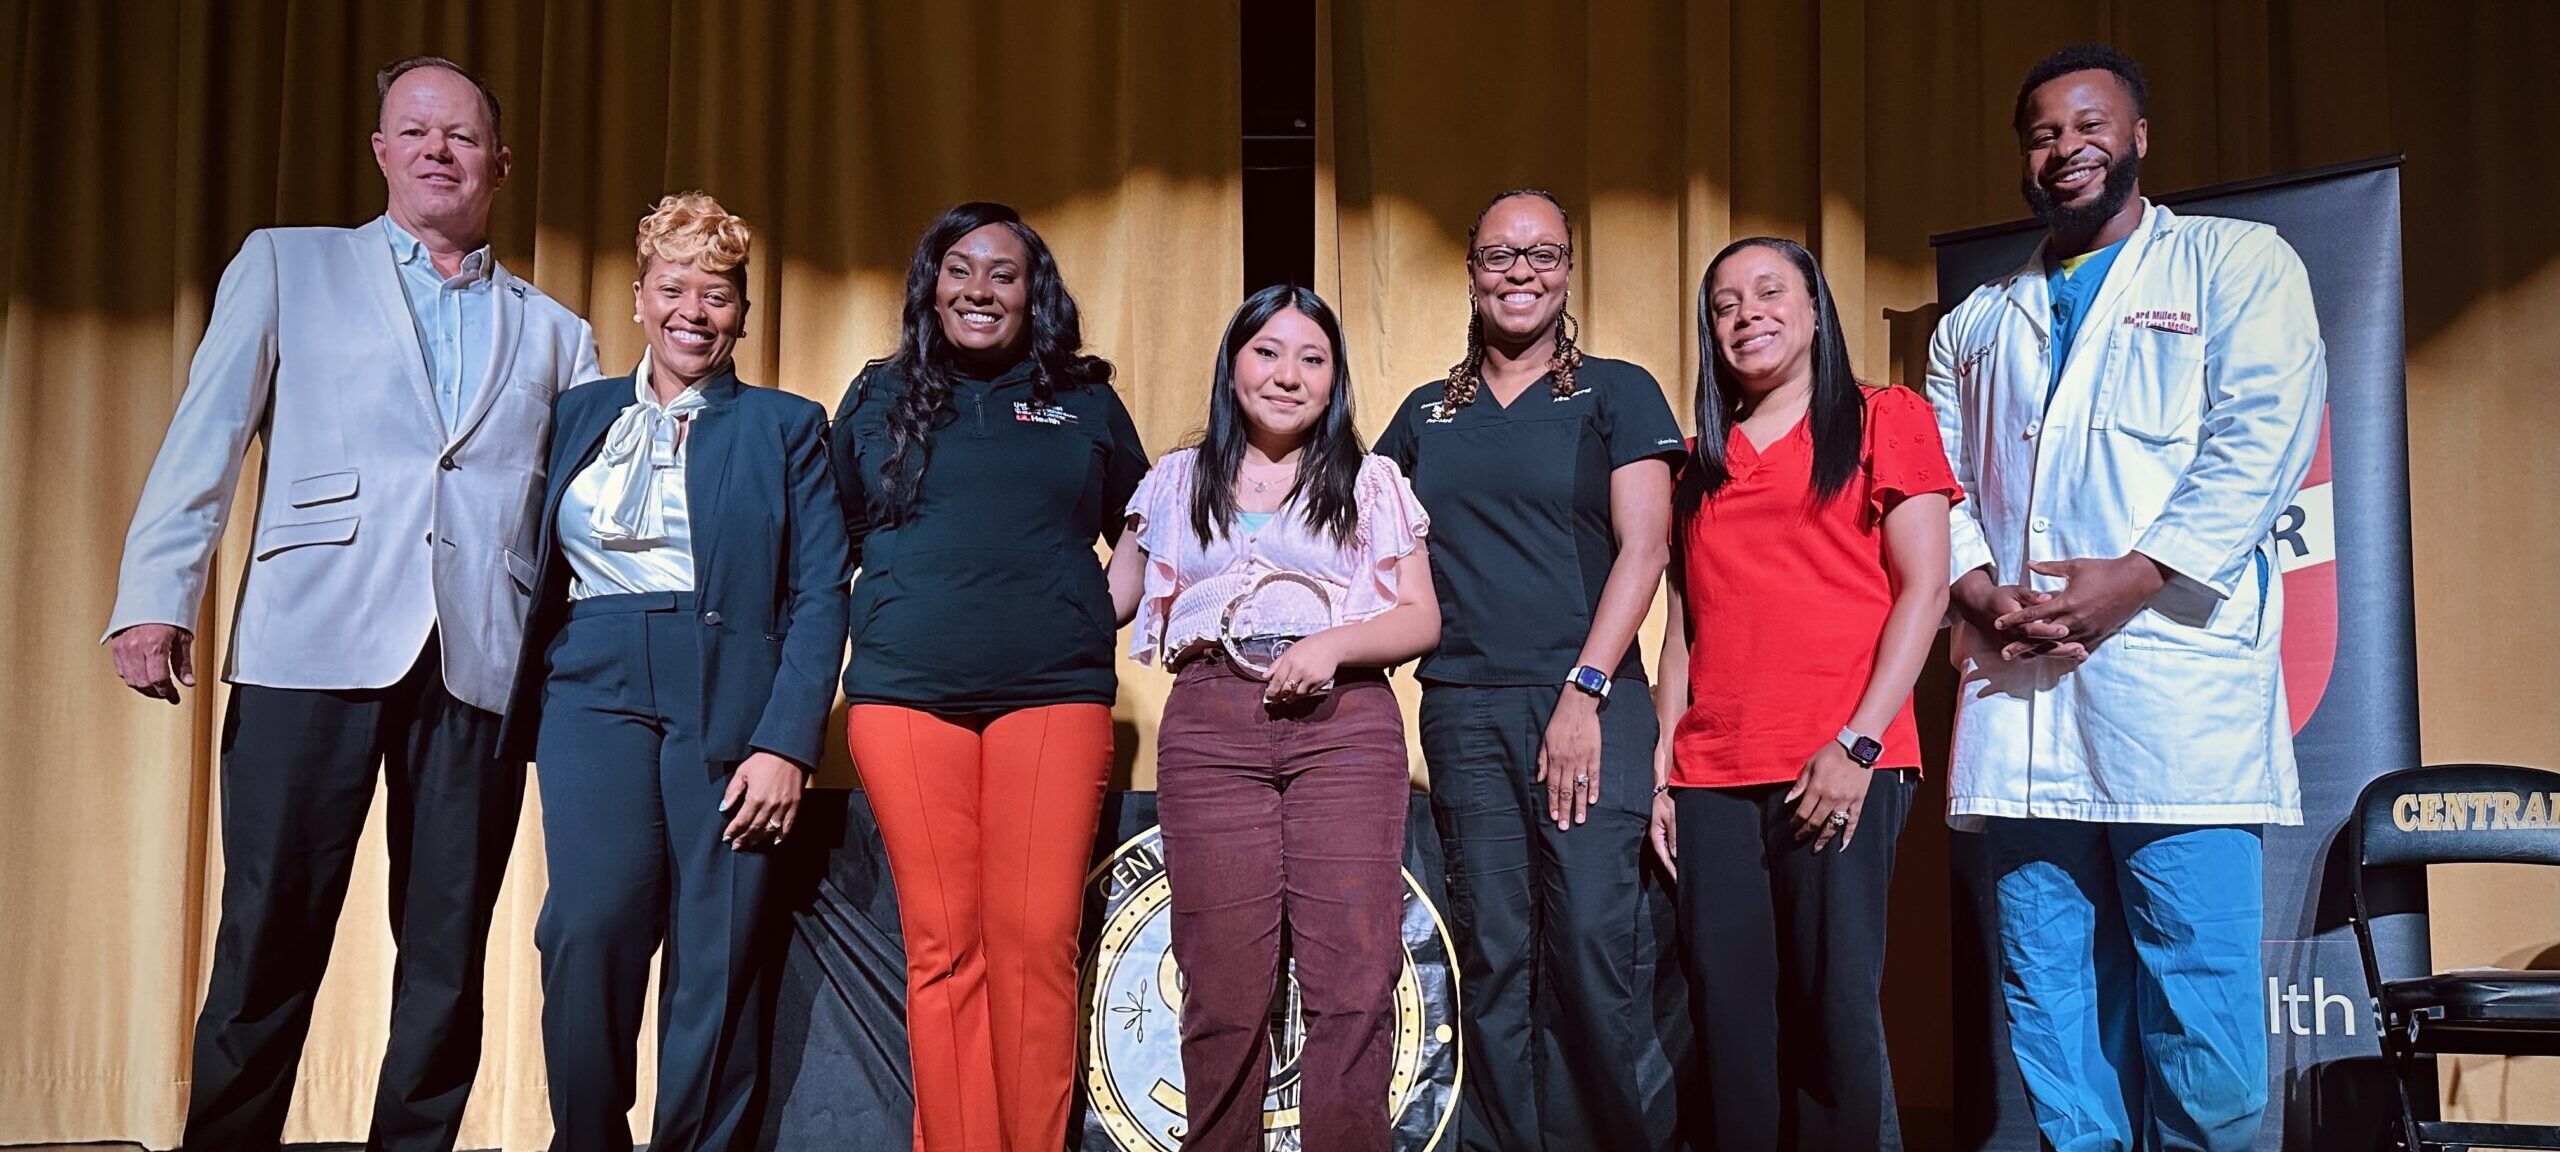 Central High School Student Jocelyn Vasquez poses with the UofL Health and Central High School leadership teams. Jocelyn (center) is holding the Award for Outstanding Service in Trauma Response she received.